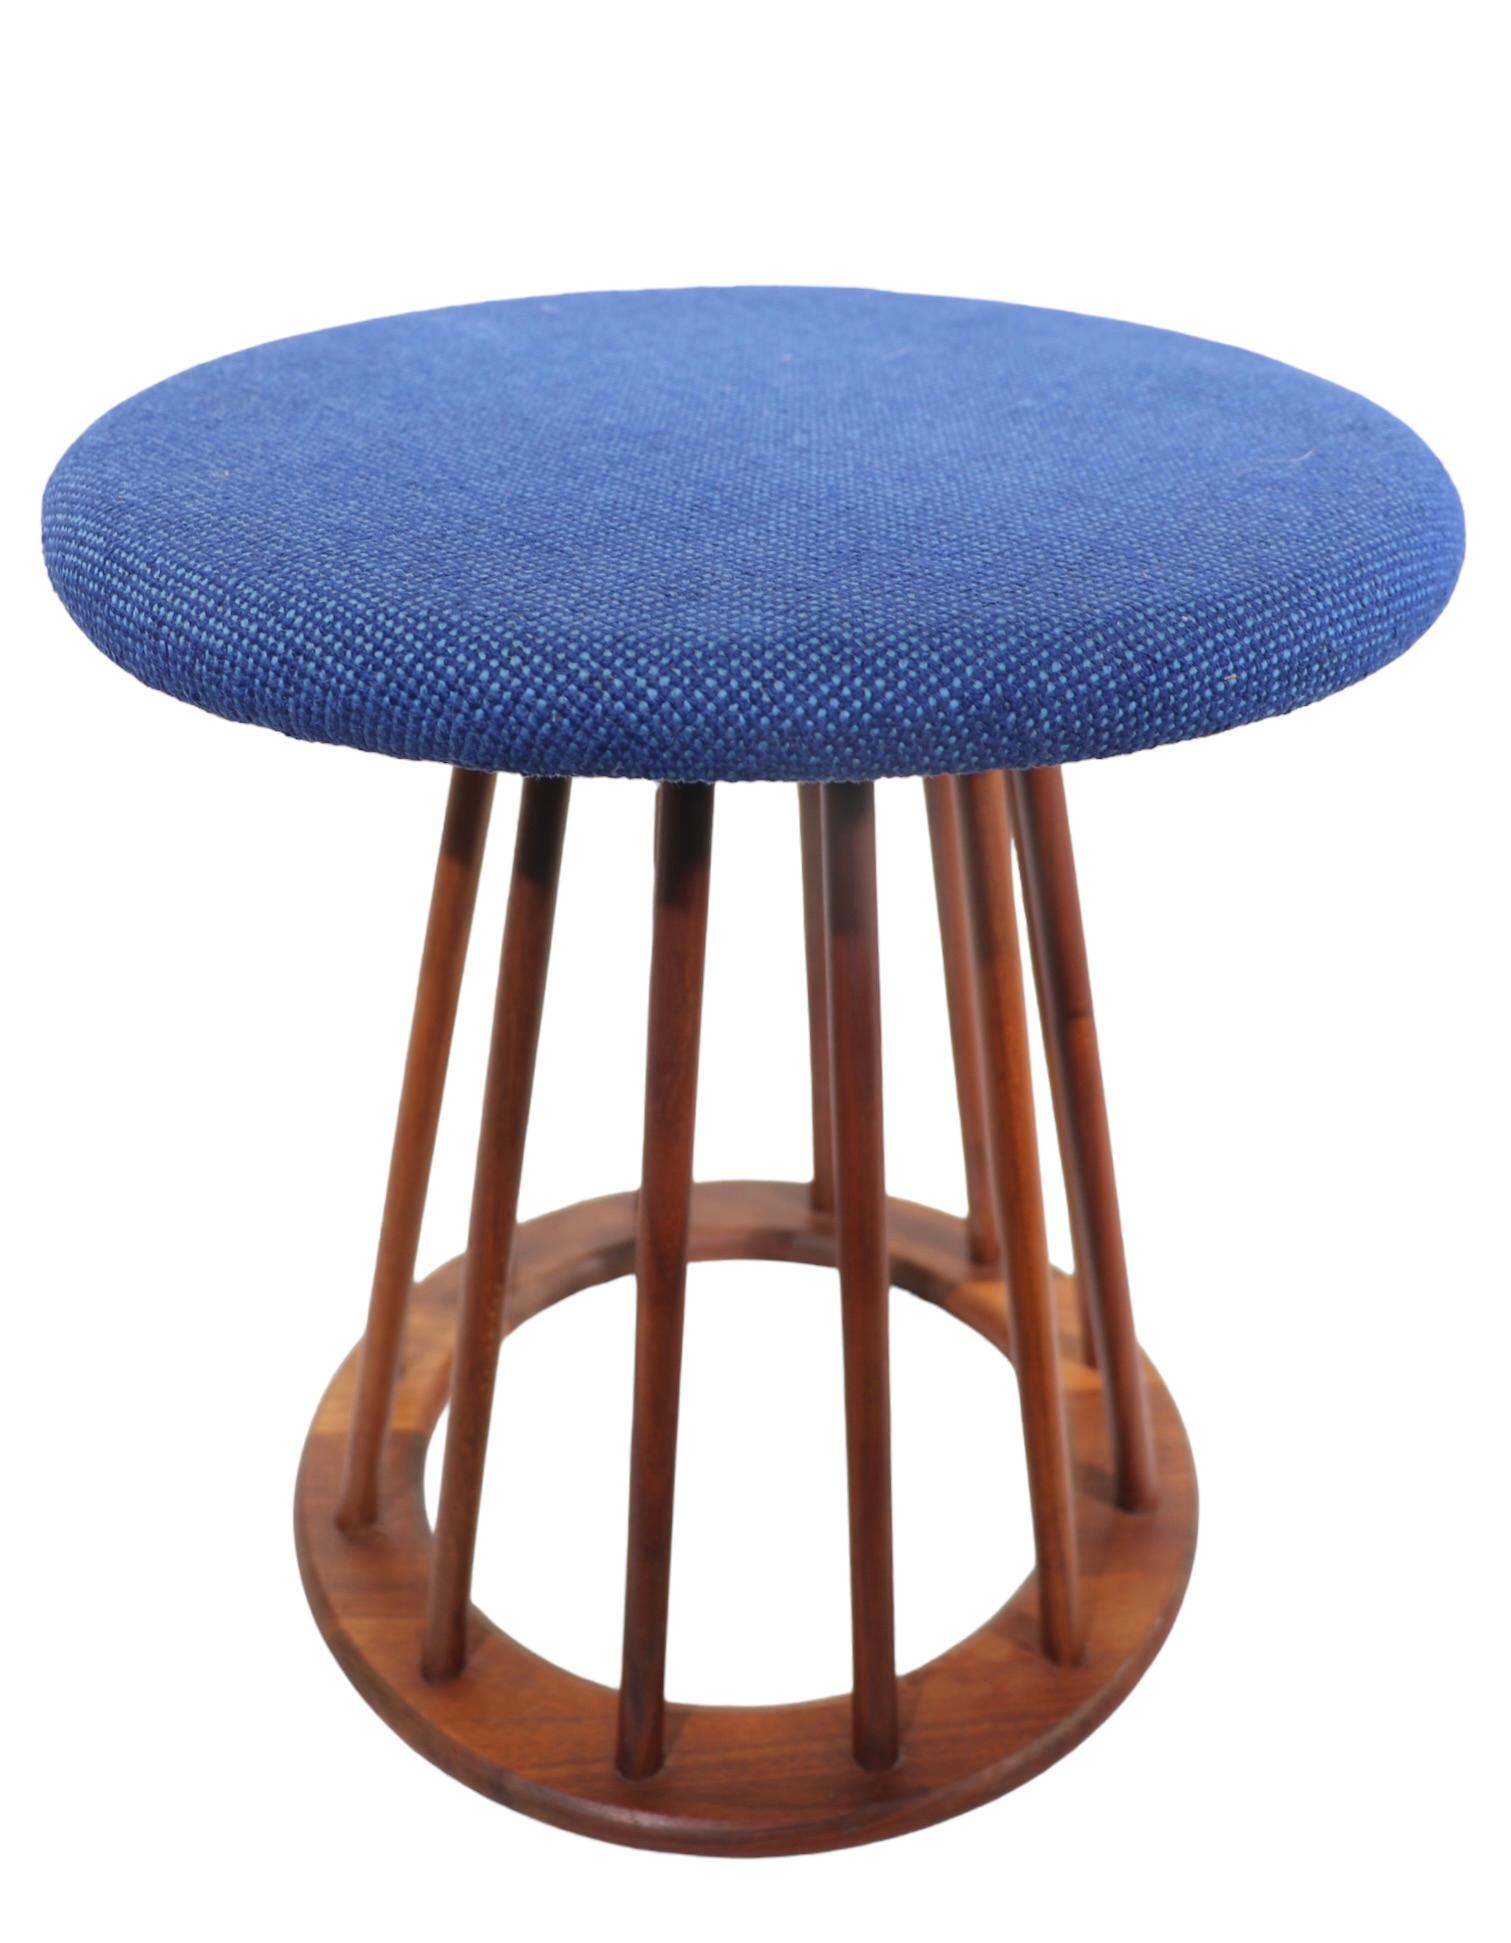 Sophisticated architectural mid century stool deigned by Arthur Umanoff, for Washington Woodcrafts, circa 1960's. This example is in very good, clean original, ready to use condition, showing only light cosmetic wear, normal and consistent with age. 